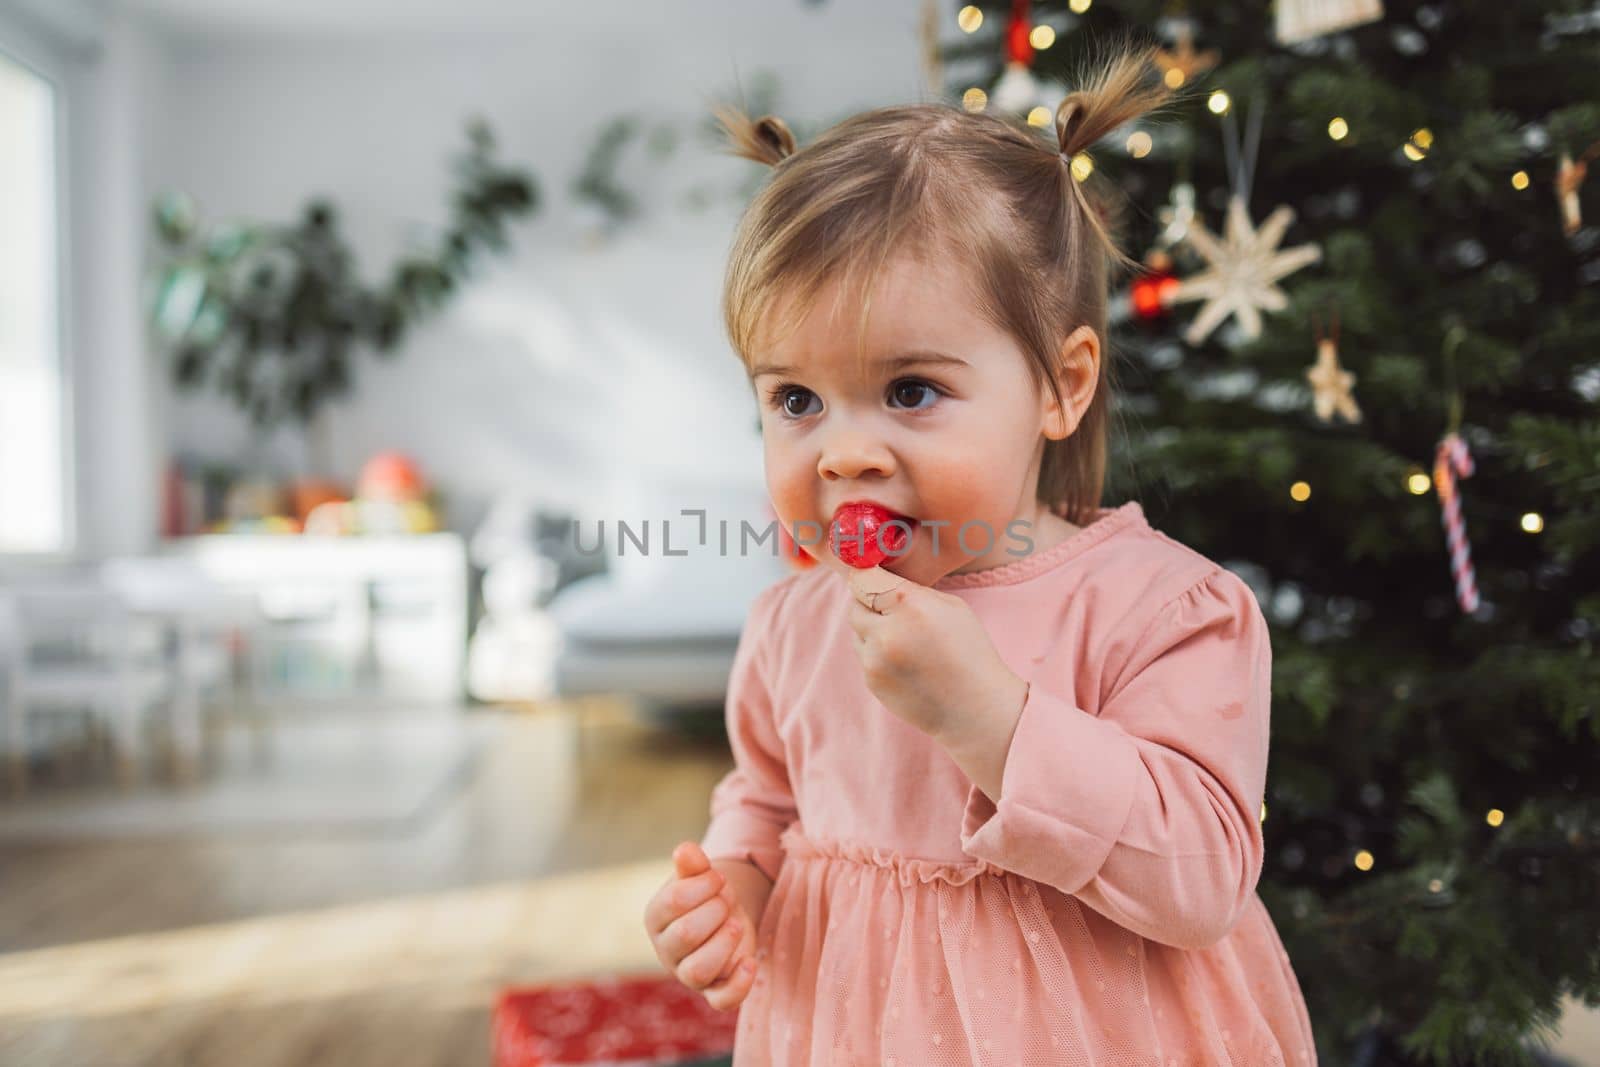 Cute little girl with two pony tails and a lollipop in her mouth wearing a beautiful pink dress by VisualProductions